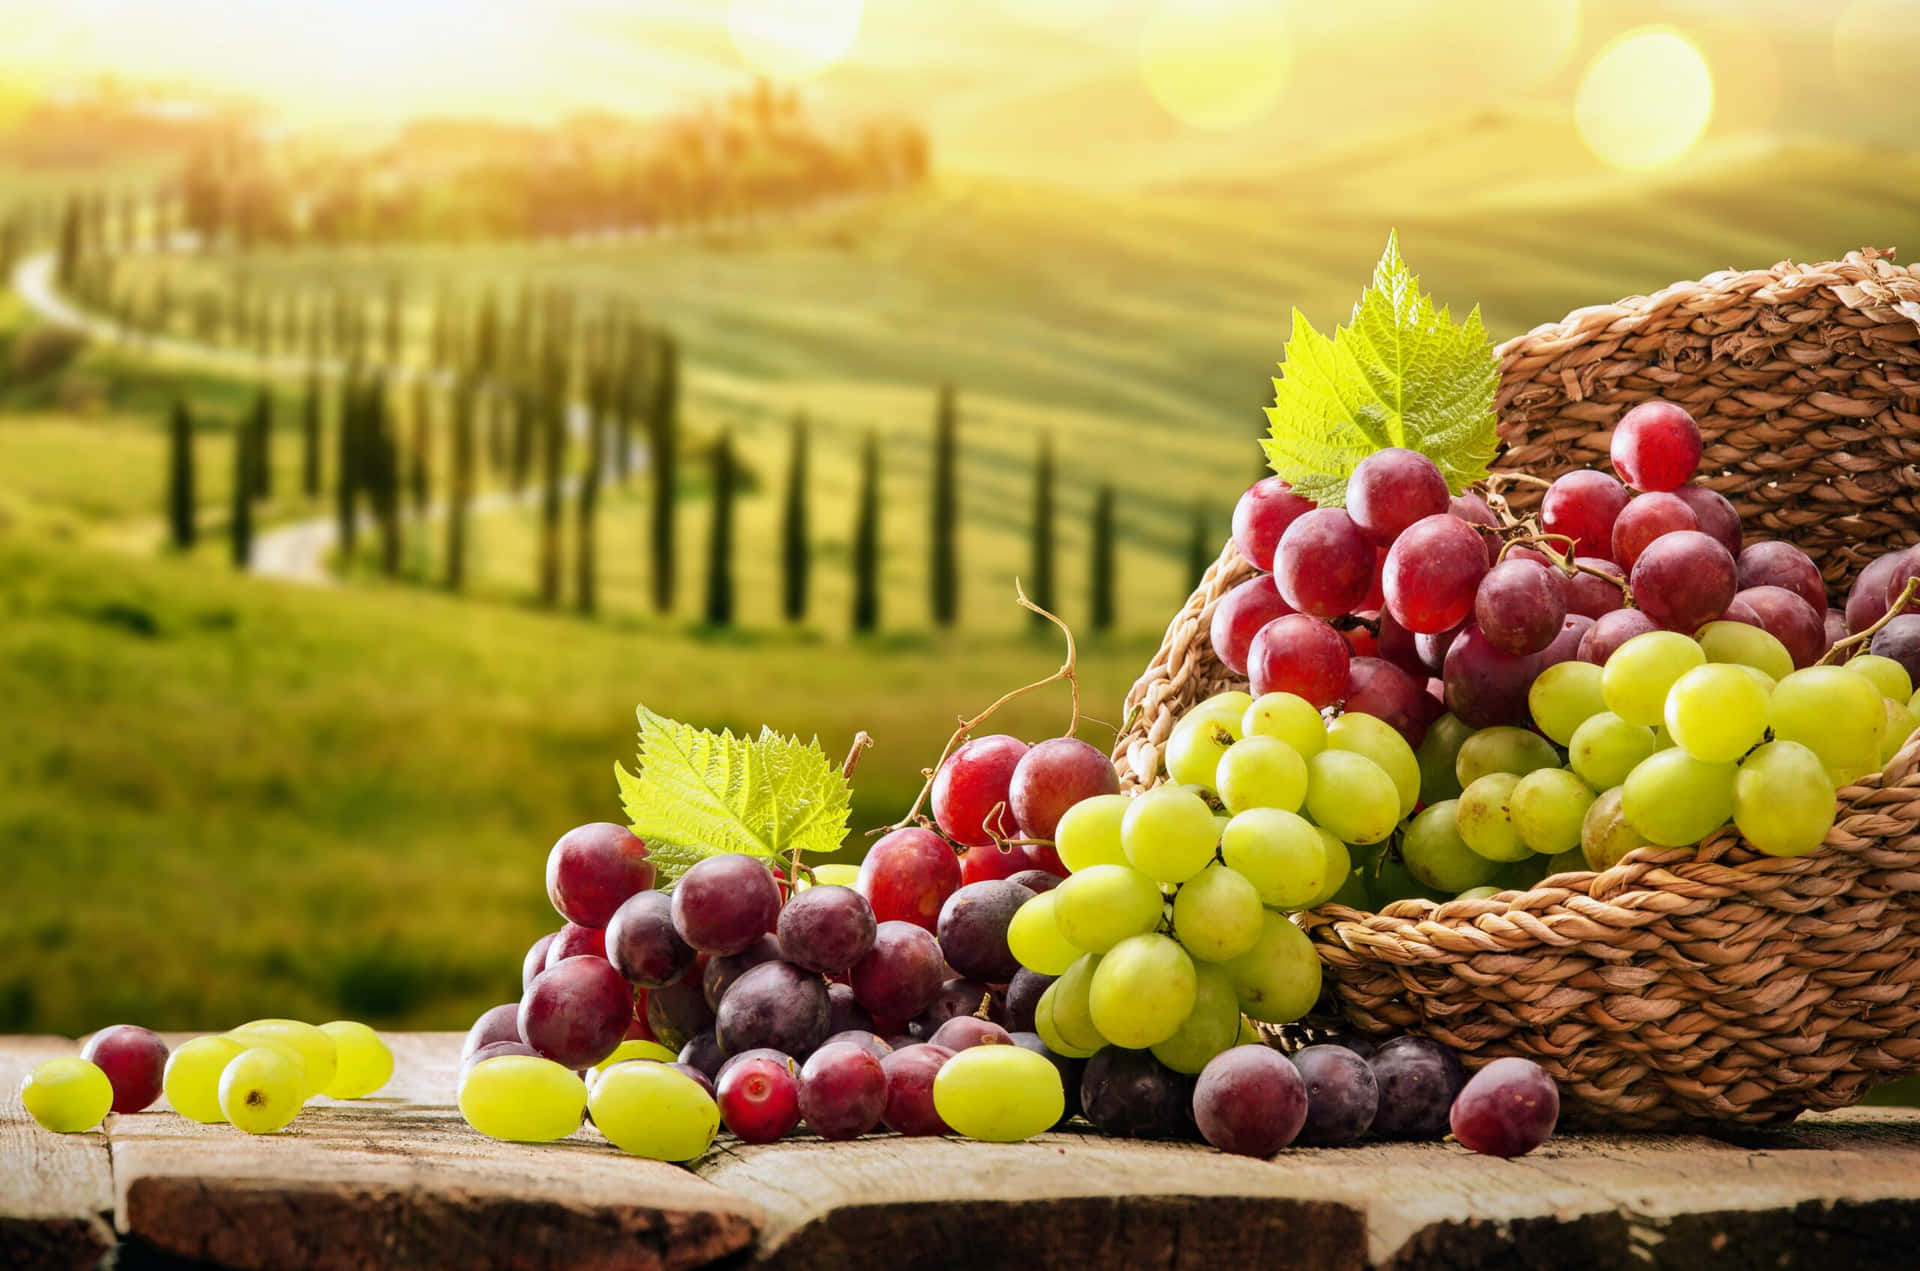 Grapes Background Wallpaper